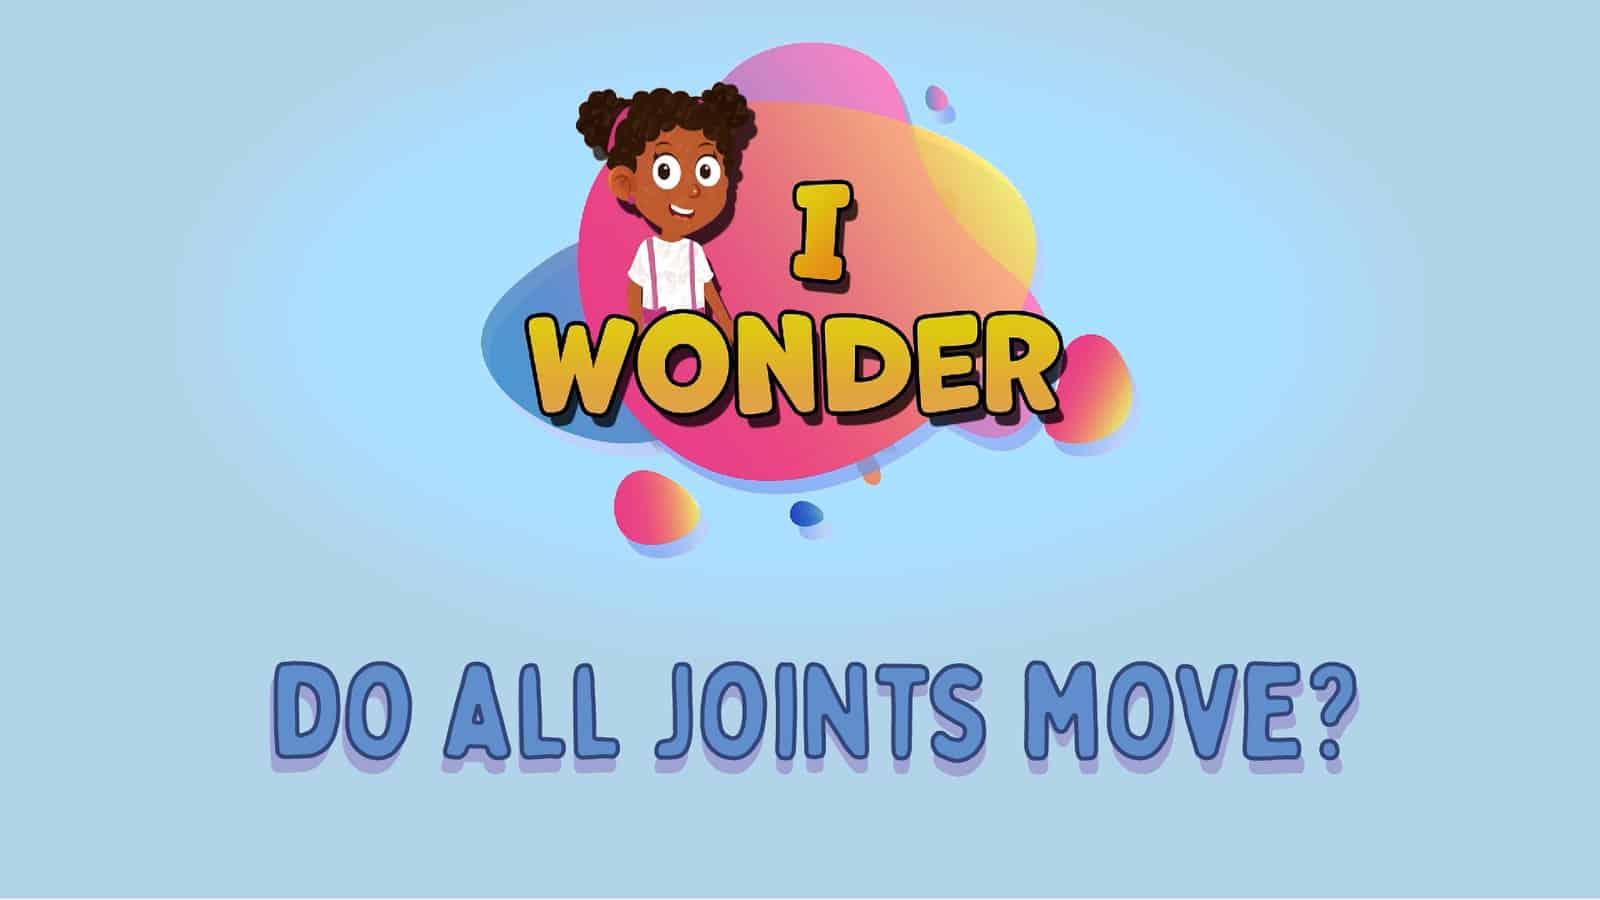 Do All Joints Move?